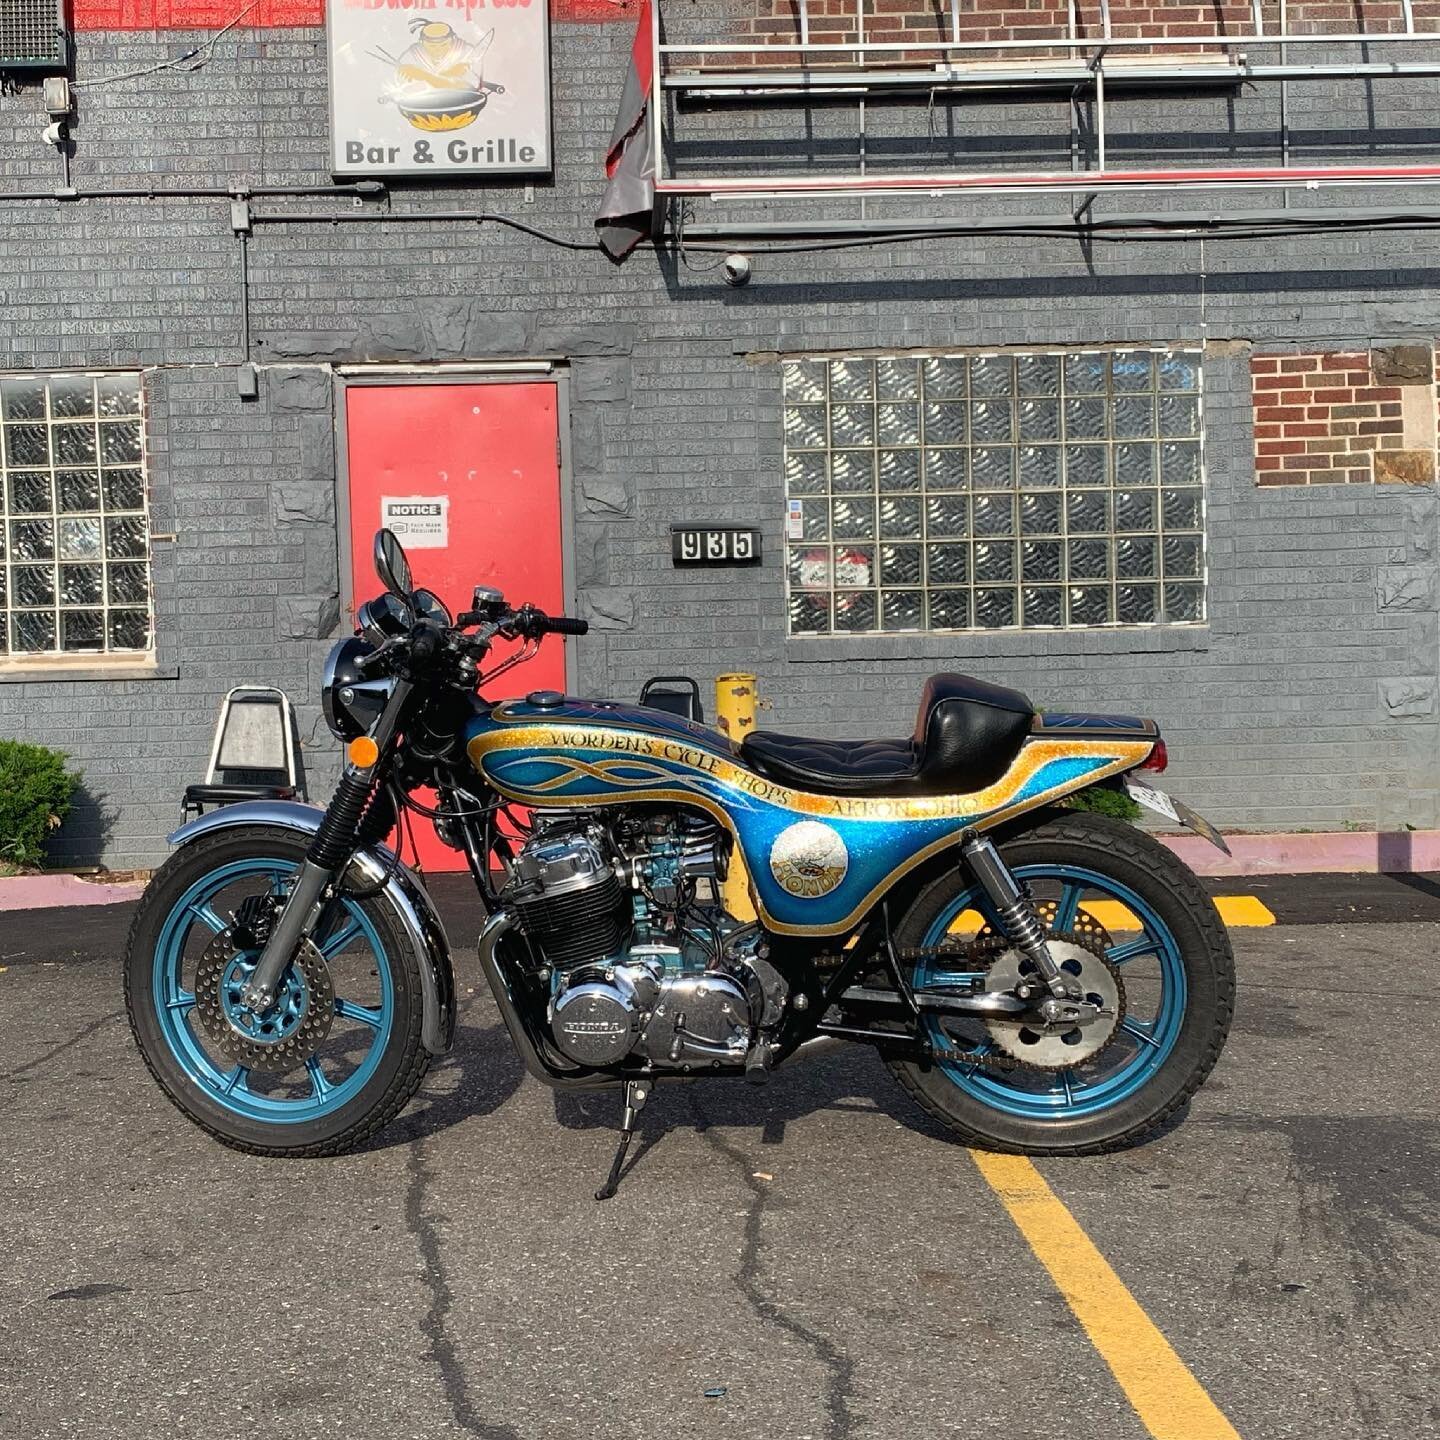 Another stop by where It all started.
935 Brown Street 
#wordensmotorcycleshop #wordens #hondacb750 #tracybody #cb750